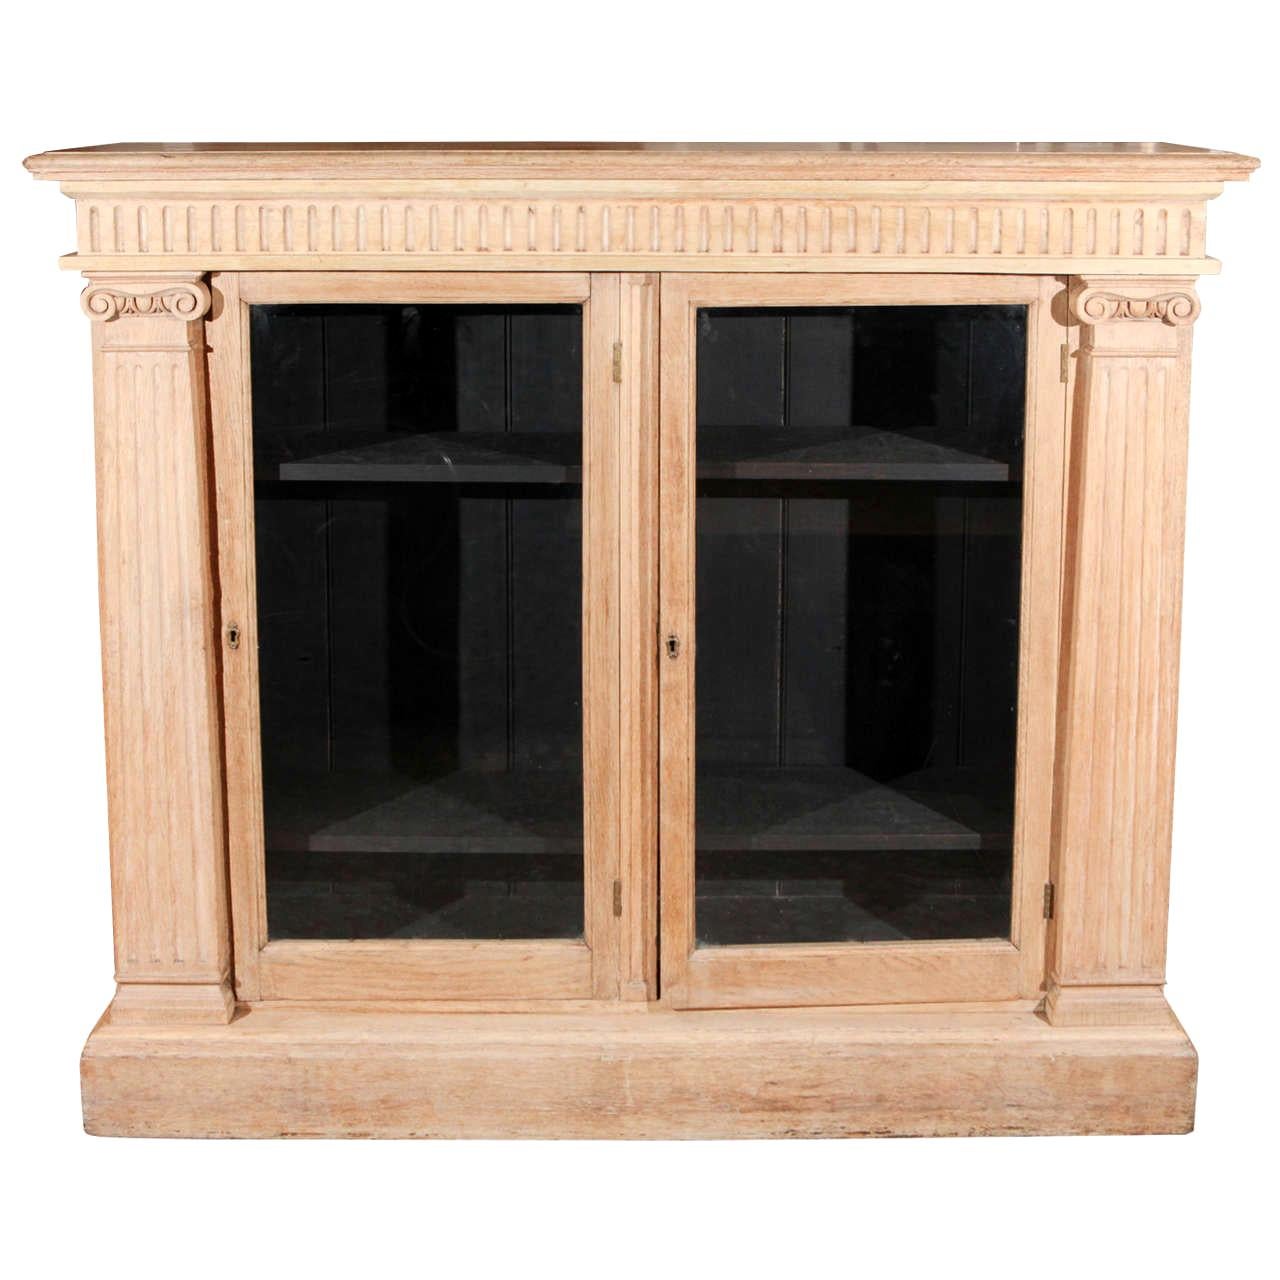 Late 19th Century English Oak Bookcase with Glass Doors For Sale